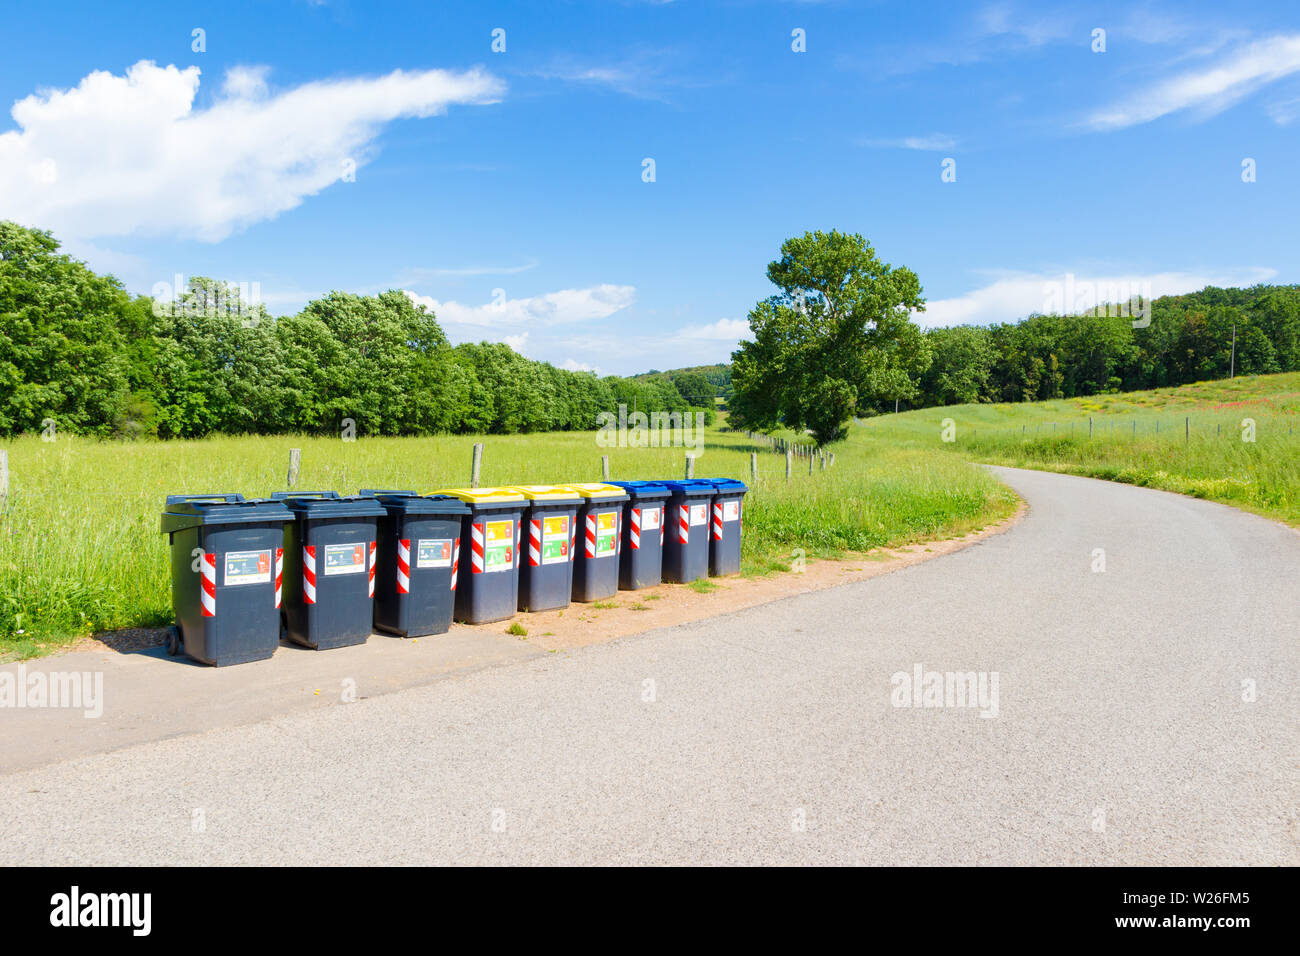 Grosseto, Italy - May 23, 2019: Separate collection of household waste in action in the beautiful tuscan countryside Stock Photo